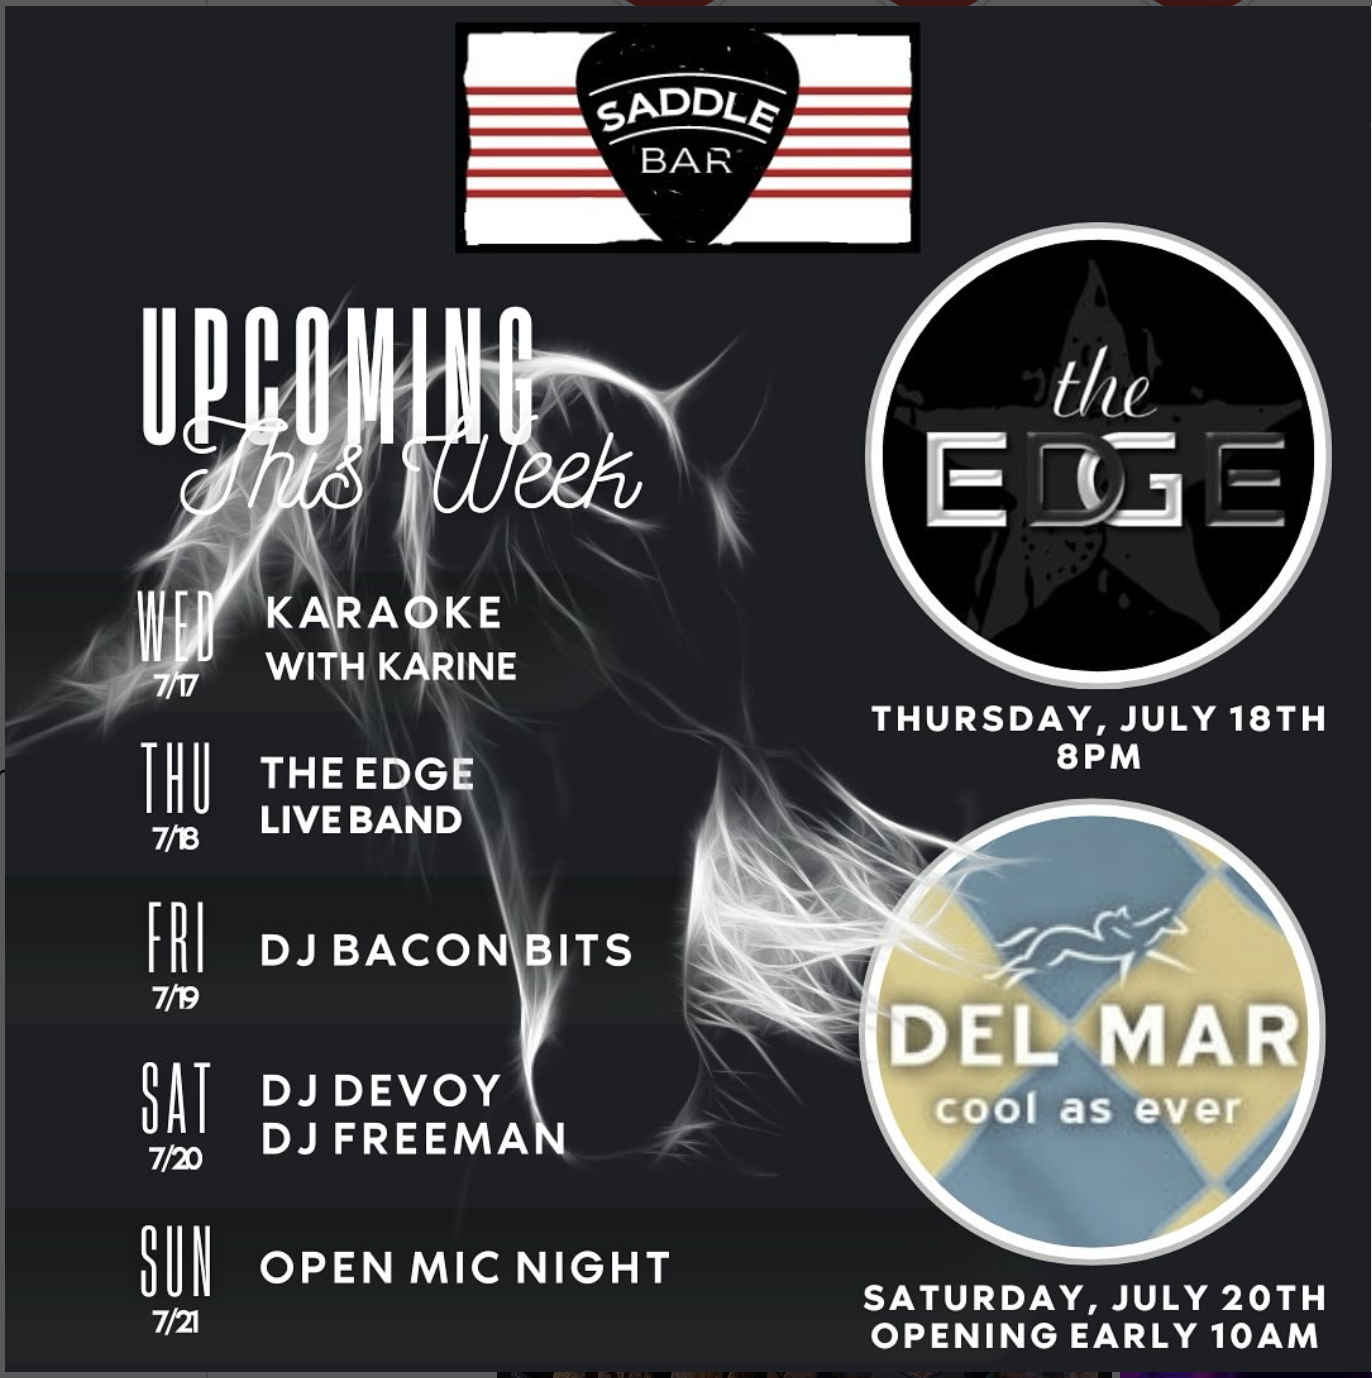 Events this week at The Saddle Bar!